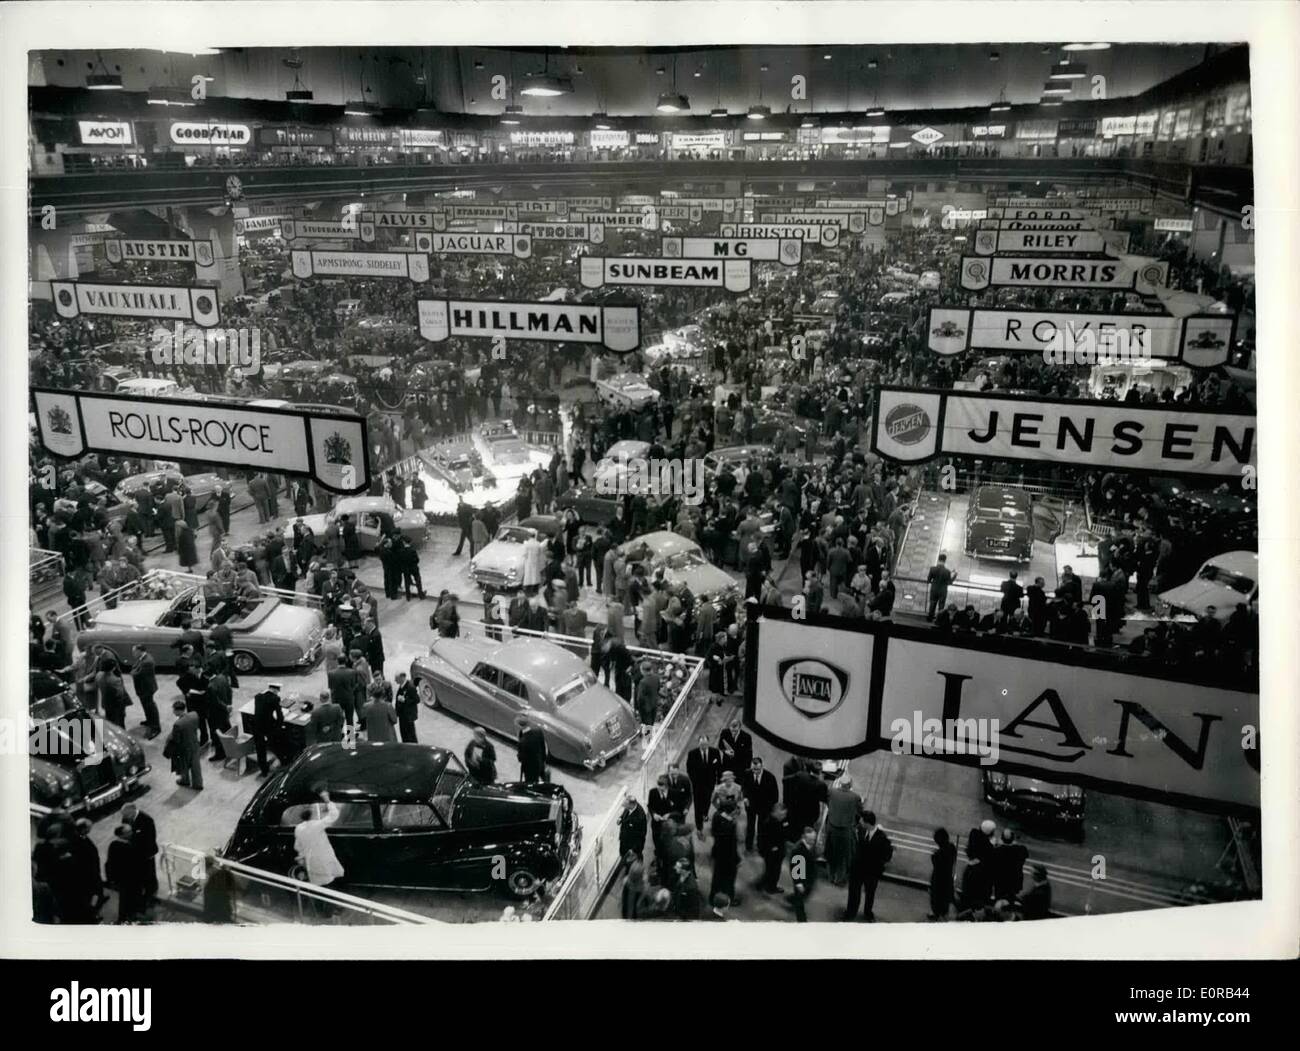 Oct. 10, 1958 - Home setary opens motor show: The home setary Mr. R.a Butler this morning opened the 1958 motor show at Ea Stock Photo